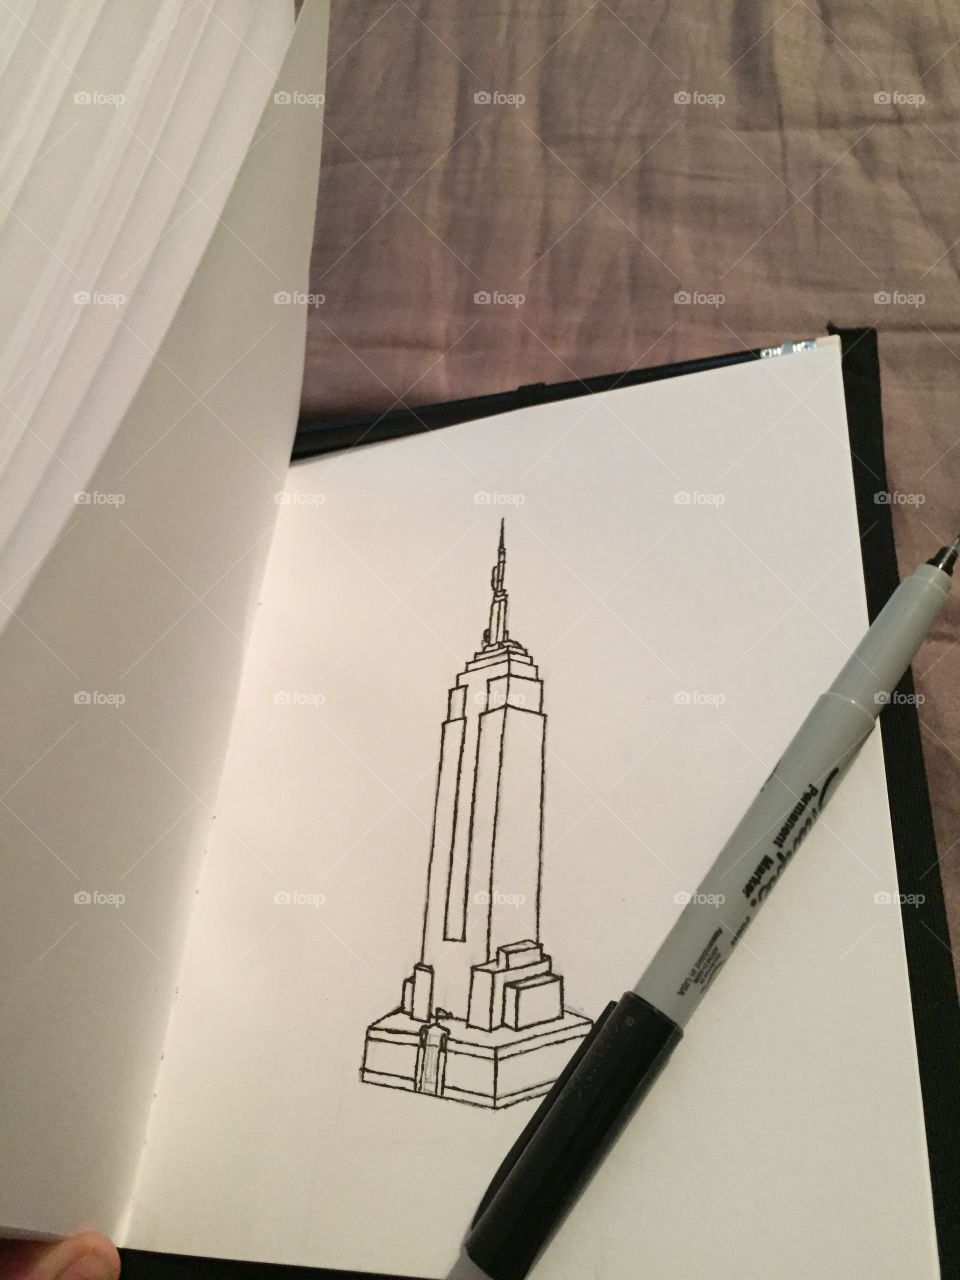 Empire. I did a drawing of the Empire State Building and decided to get a picture of it.